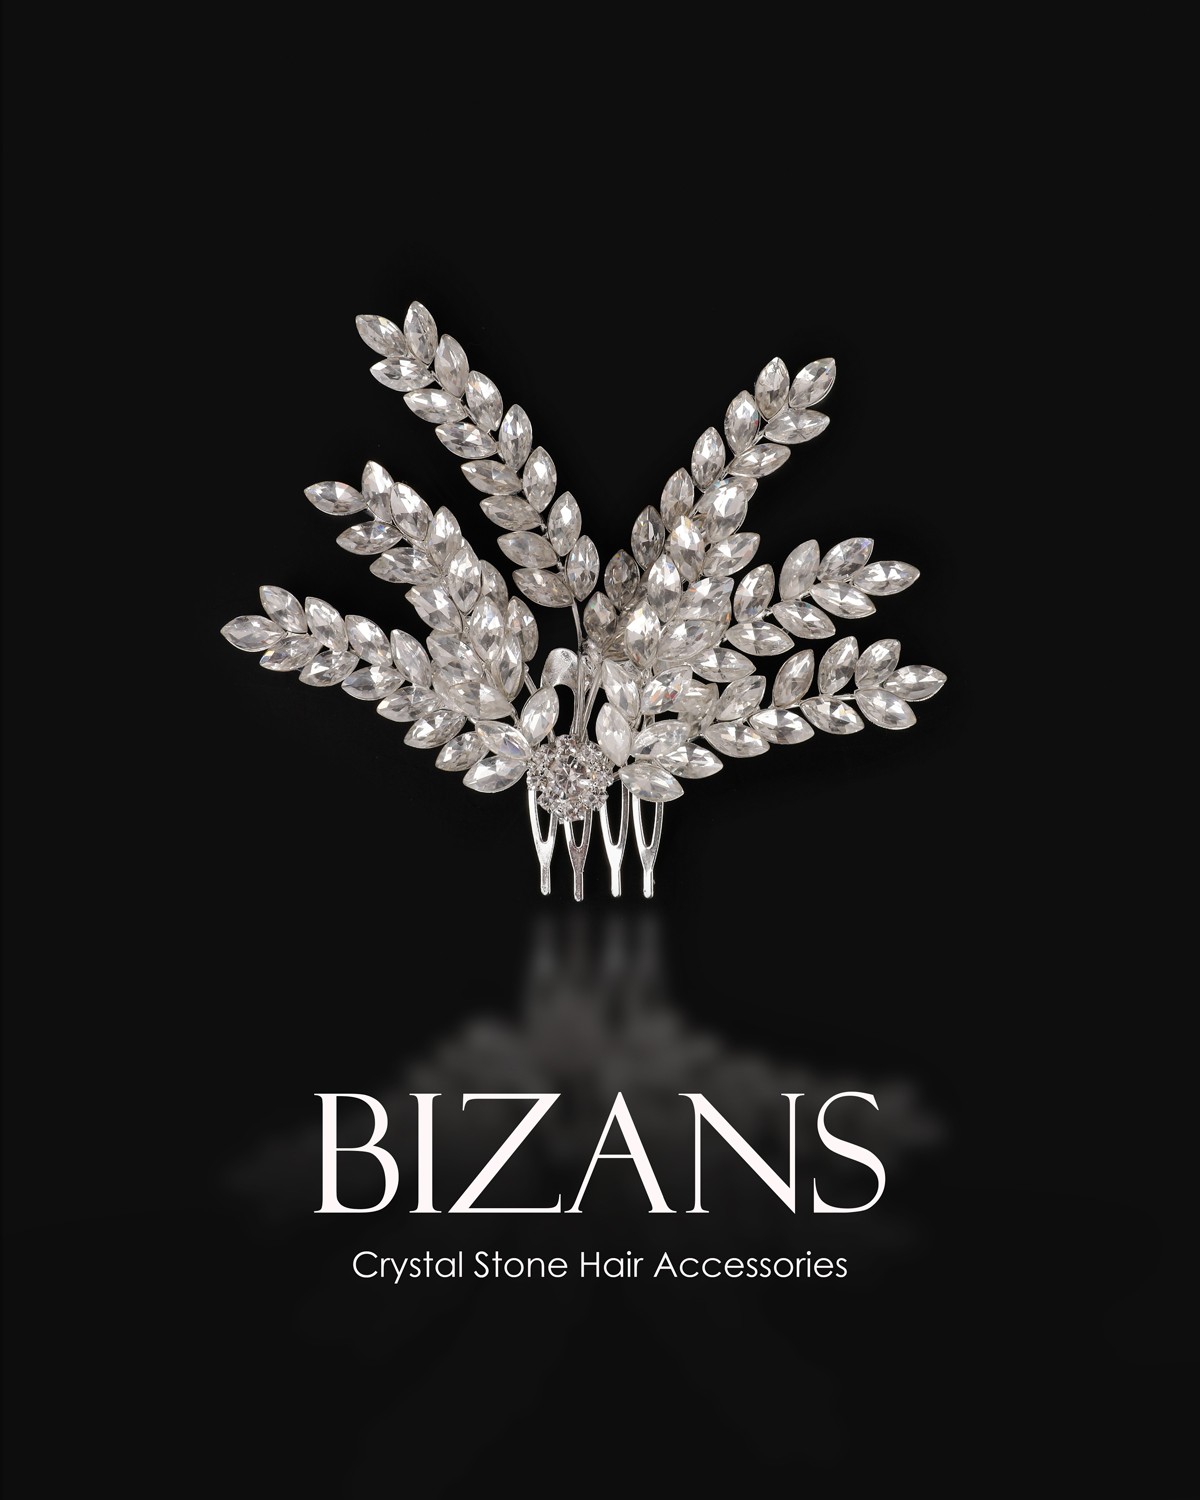 Bizans Crystal Stone Comb Hair Accessories Buy Now.